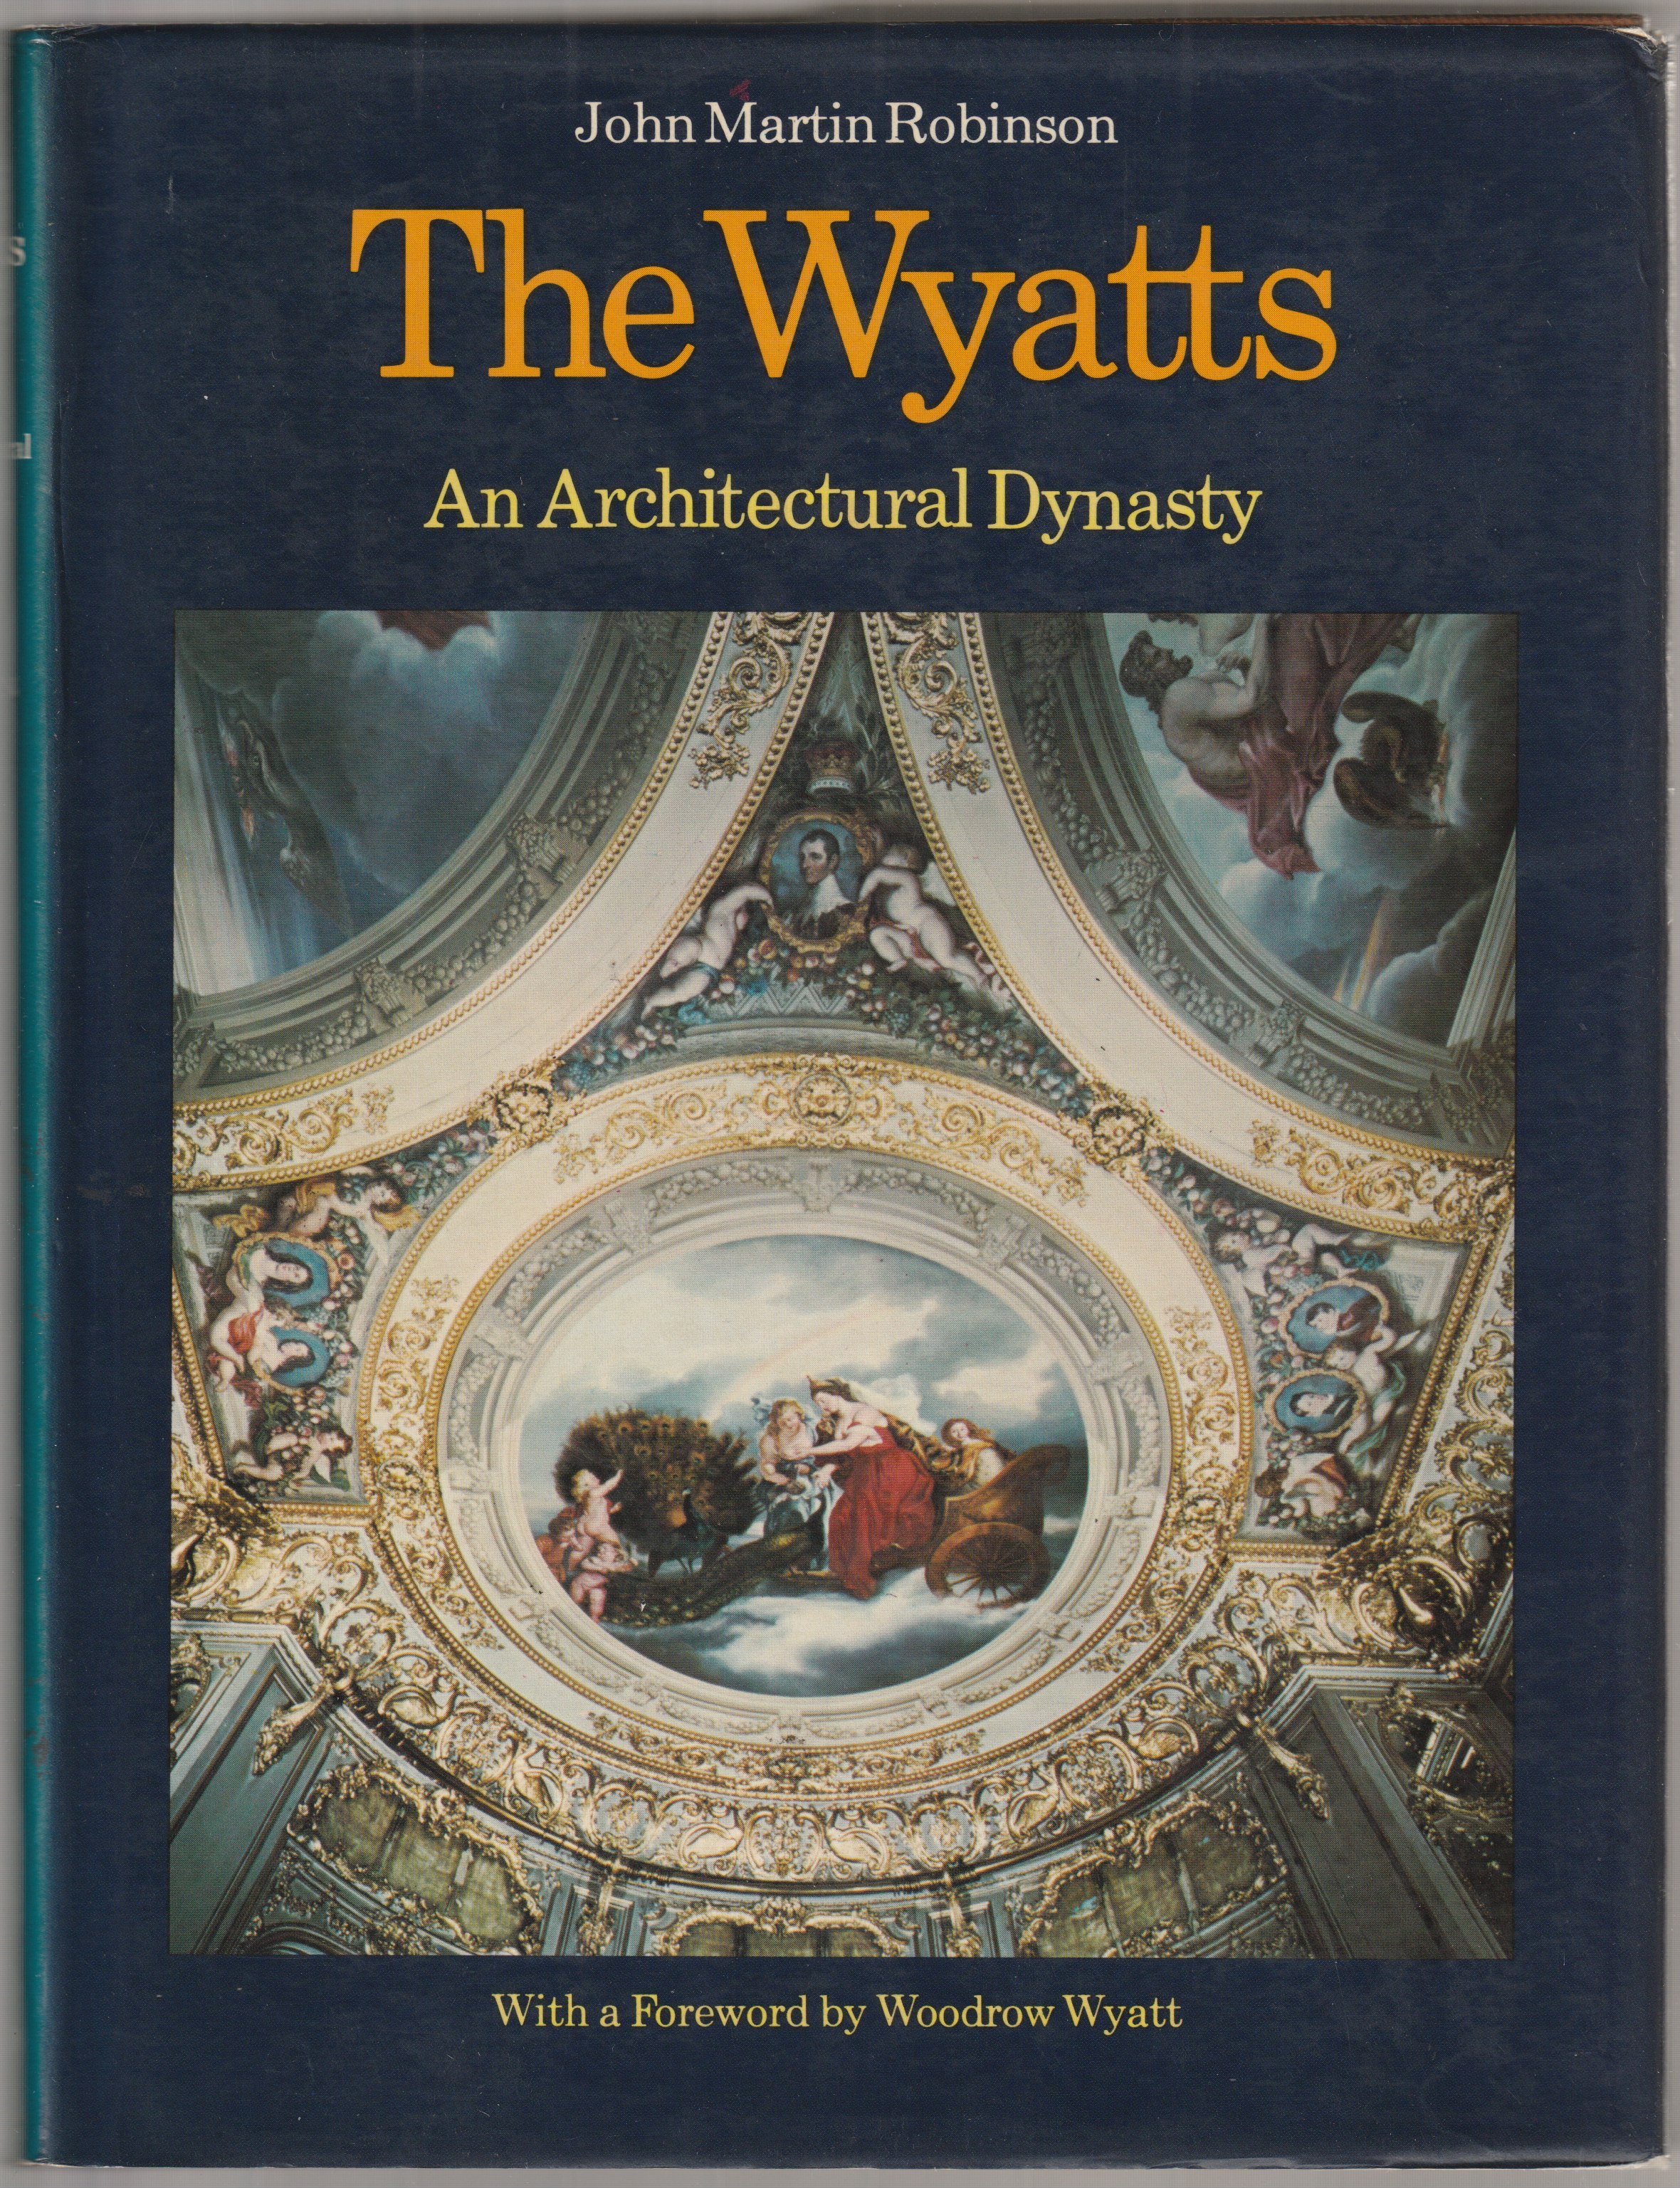 The Wyatts, an architectural dynasty.